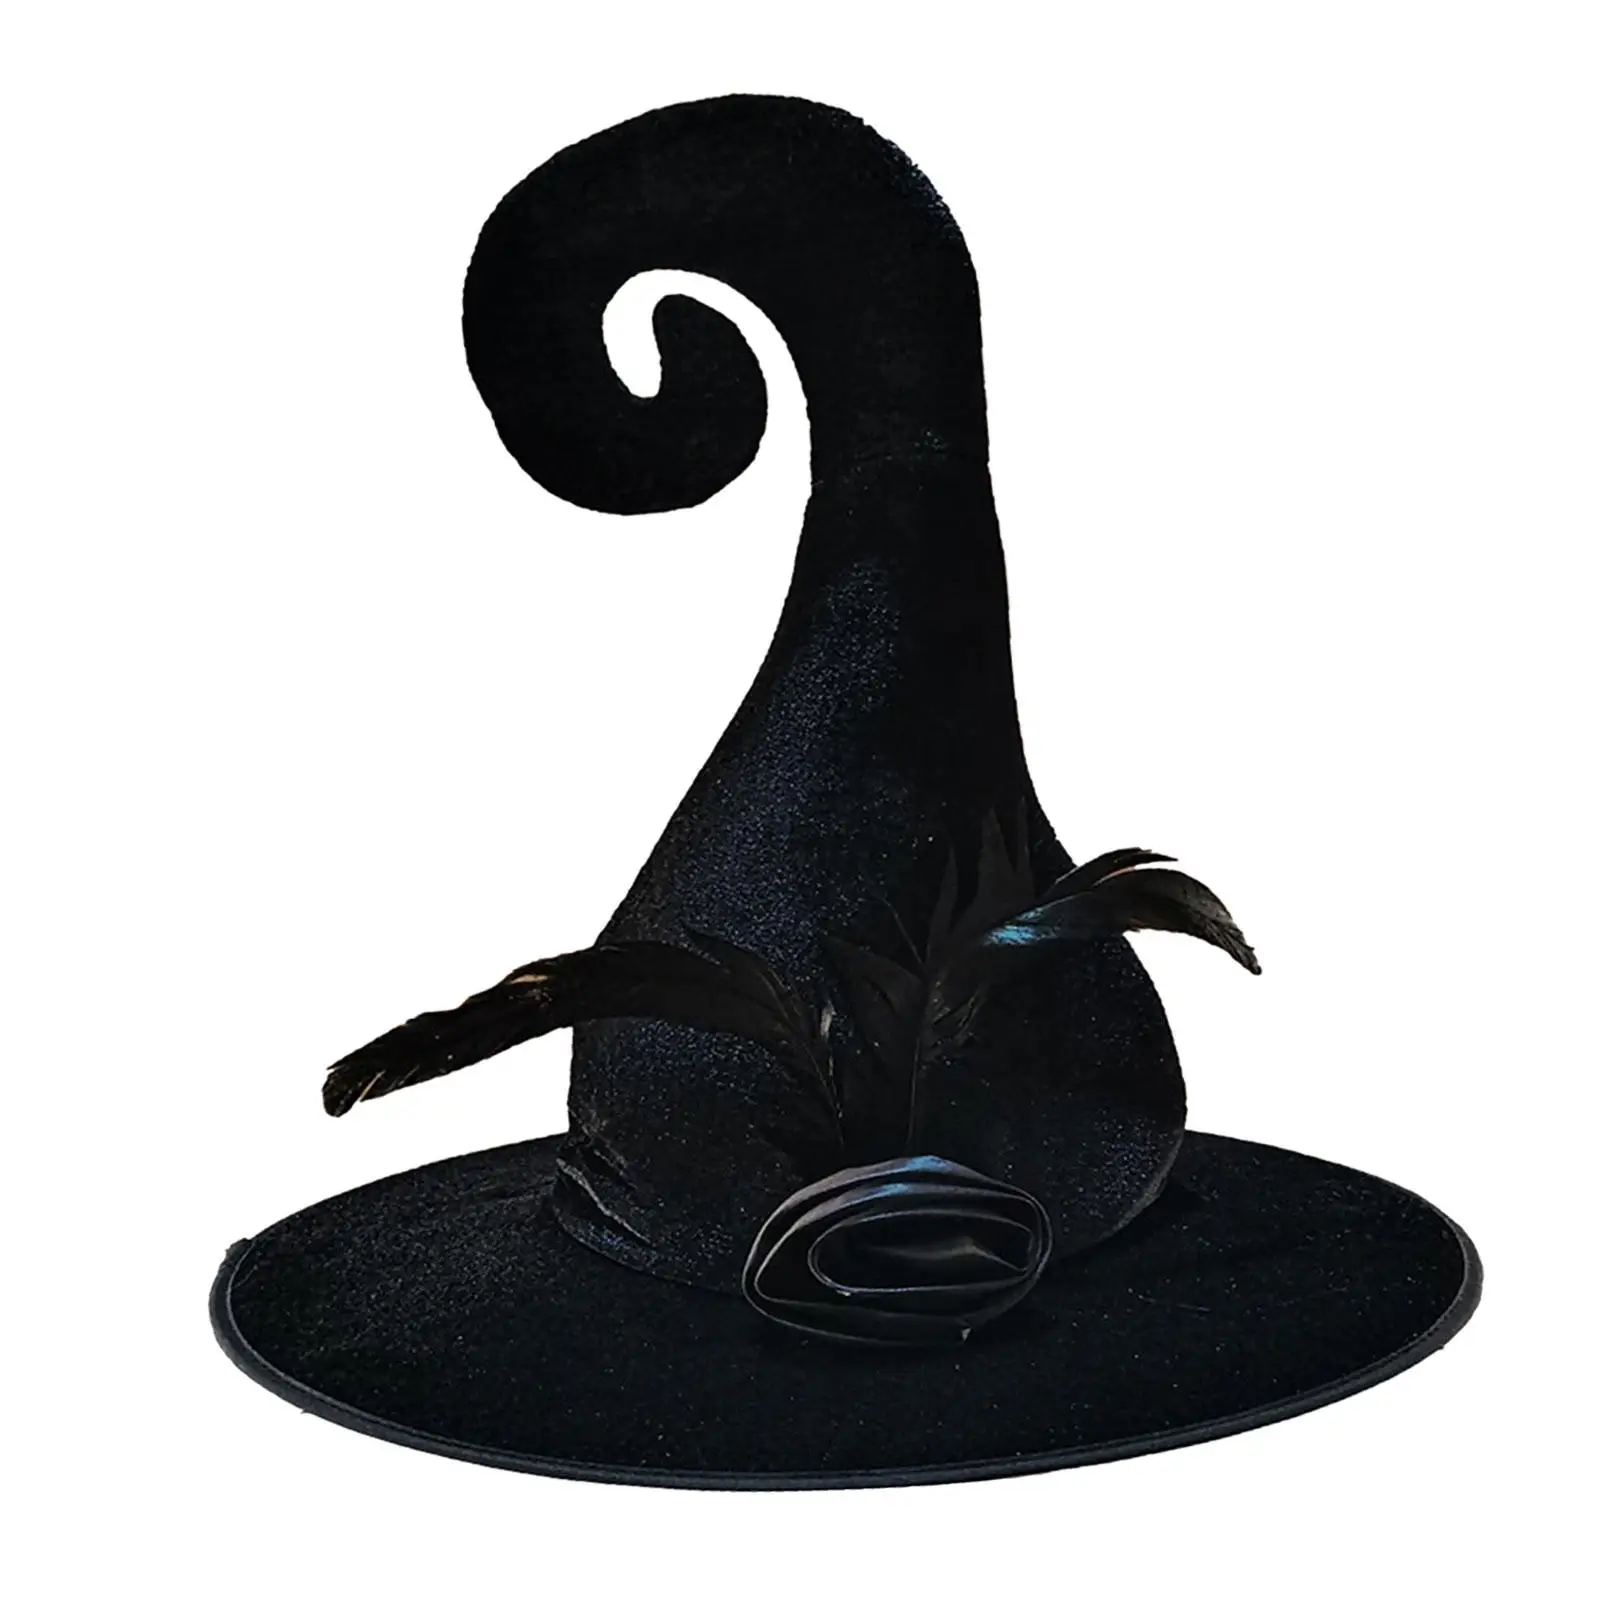 Witch Women Hat Modern Costume Accessory with Roses Feathers Wide Brim Cap Sorceress Hat for Halloween Party Cosplay Masquerade